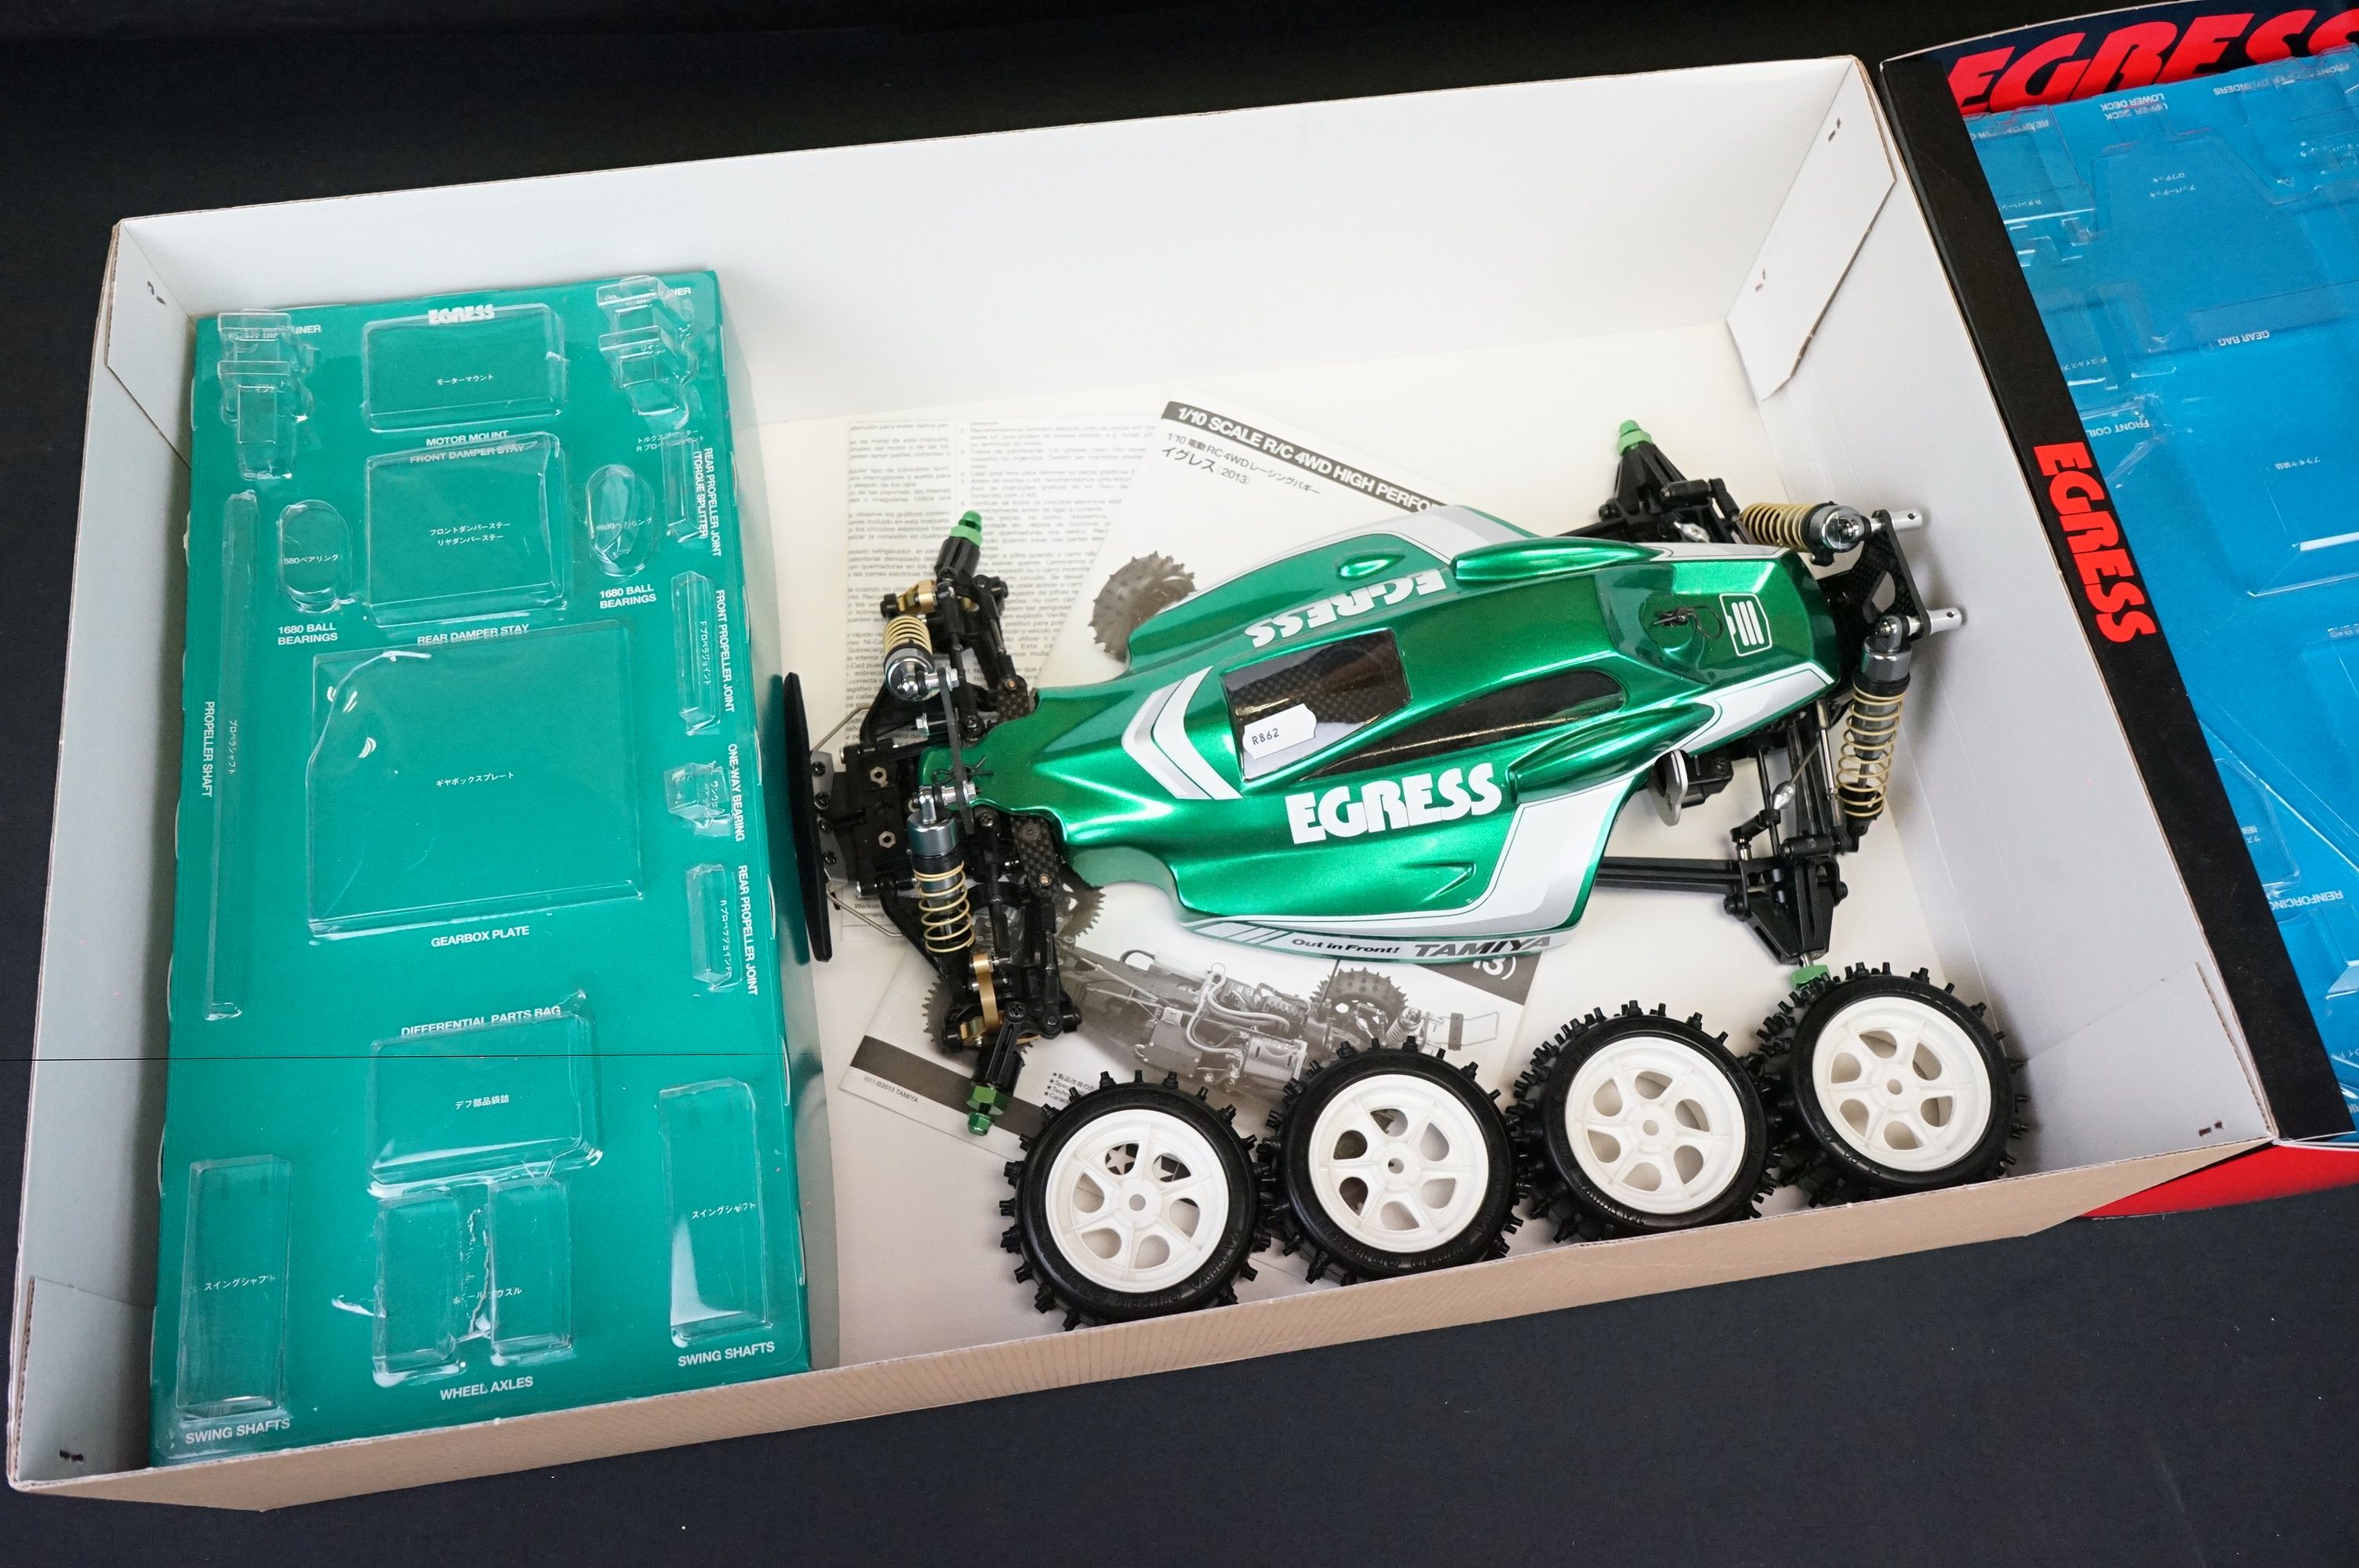 Boxed Tamiya 1/10 58583 Egress 4WD R/C High Speed Performance Off Road Racer radio control car, with - Image 2 of 12